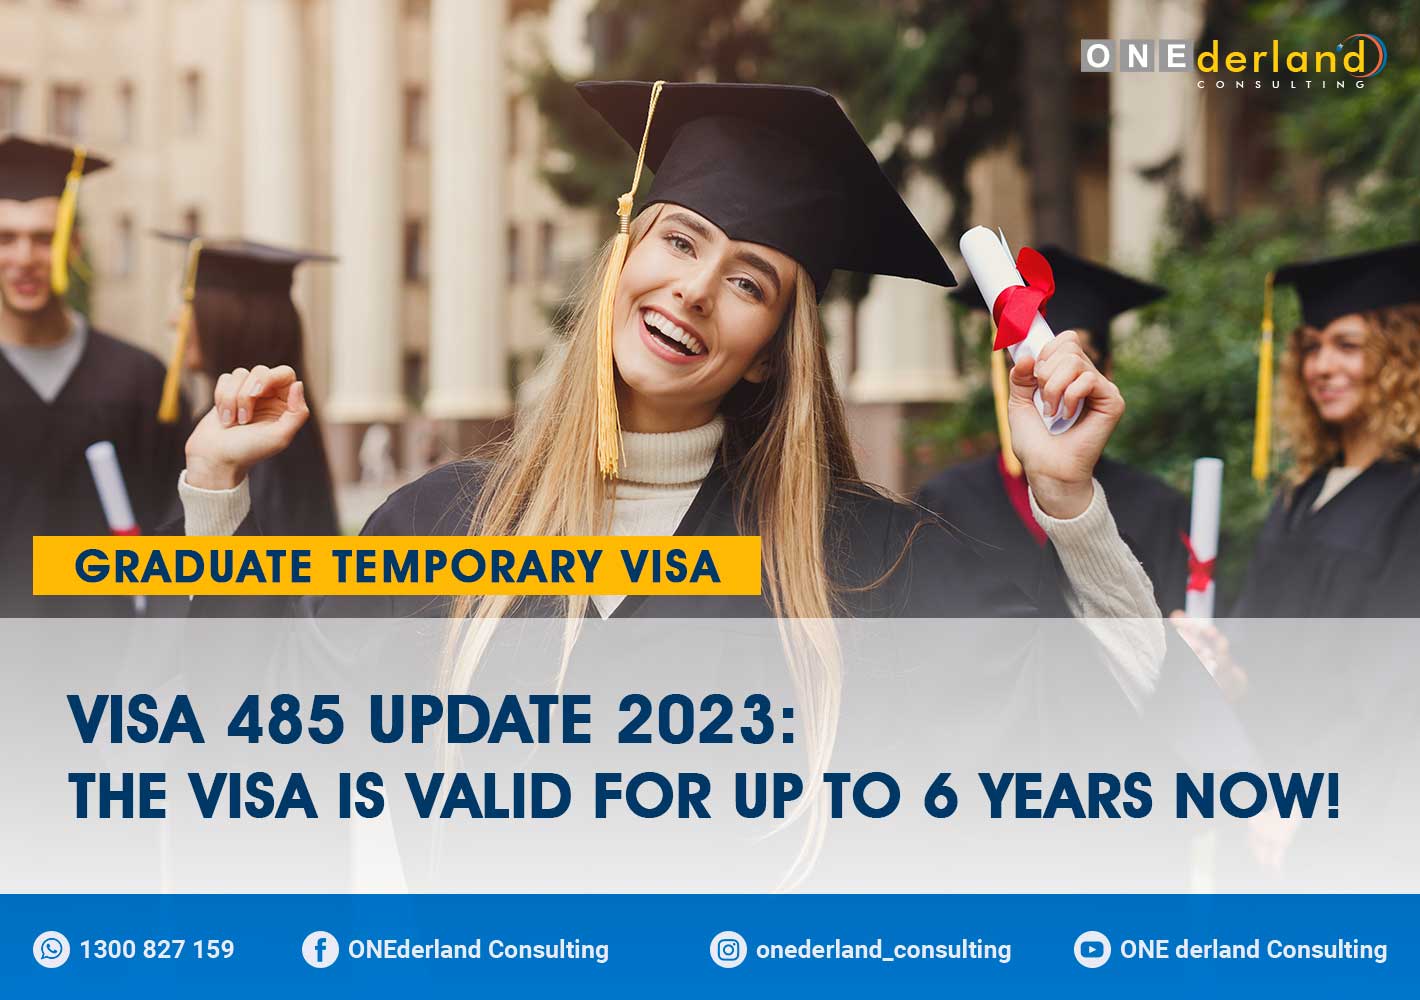 Visa 485 Update 2023 The Visa is Valid for up to 6 YEARS NOW!